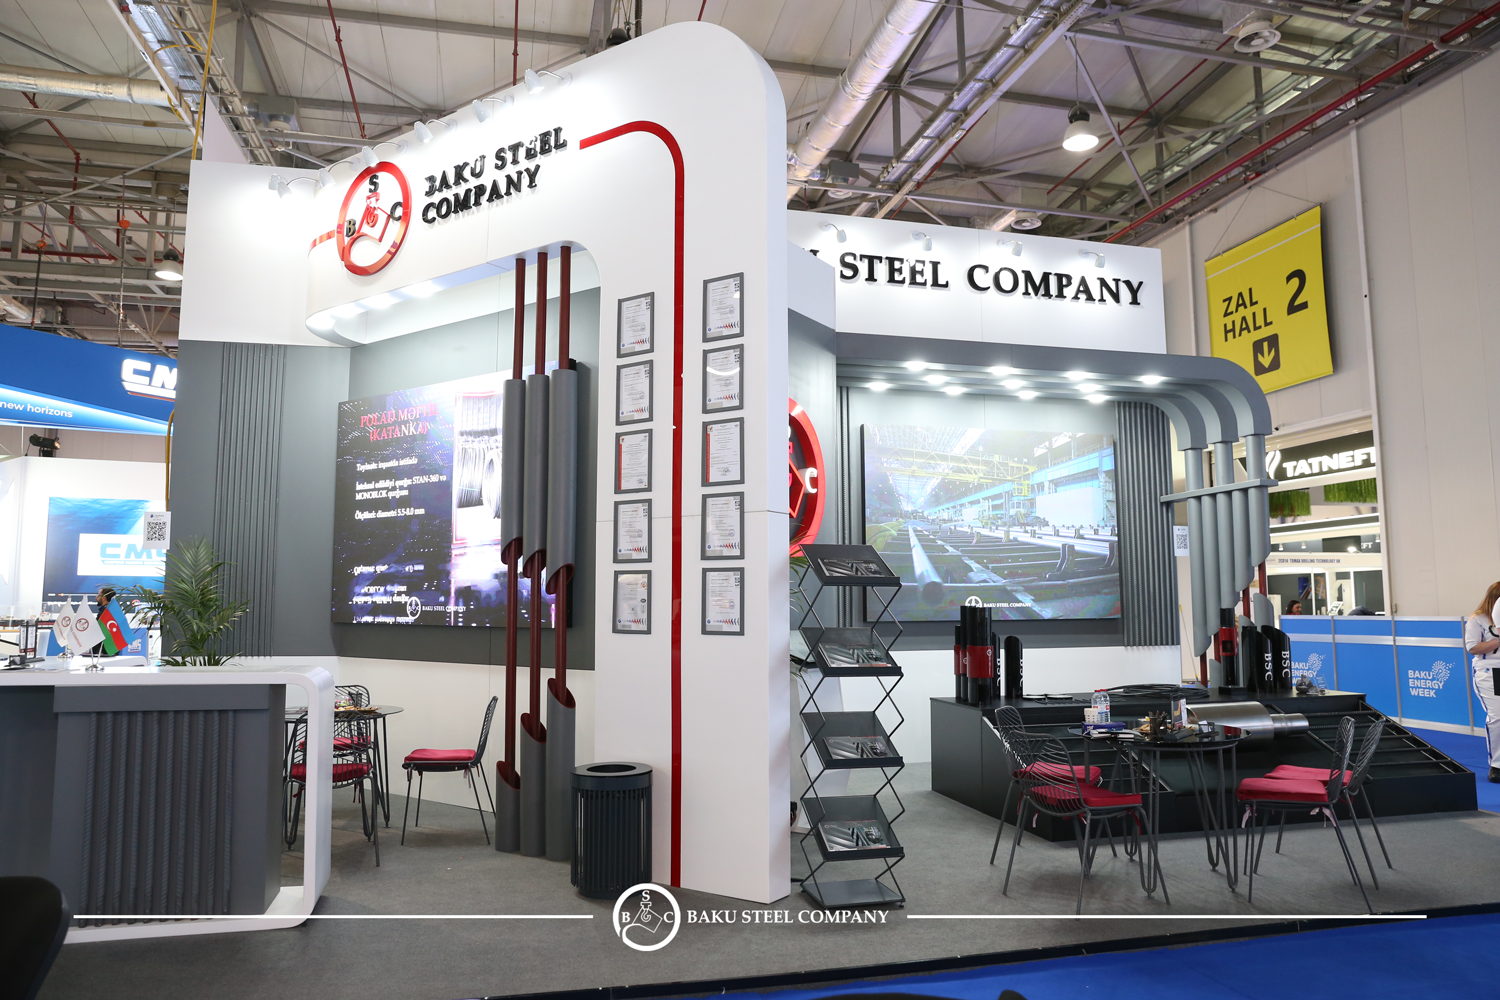 CJSC "Baku Steel Company" takes part at the 29th International Exhibition "Caspian Oil and Gas" (PHOTO/VIDEO)